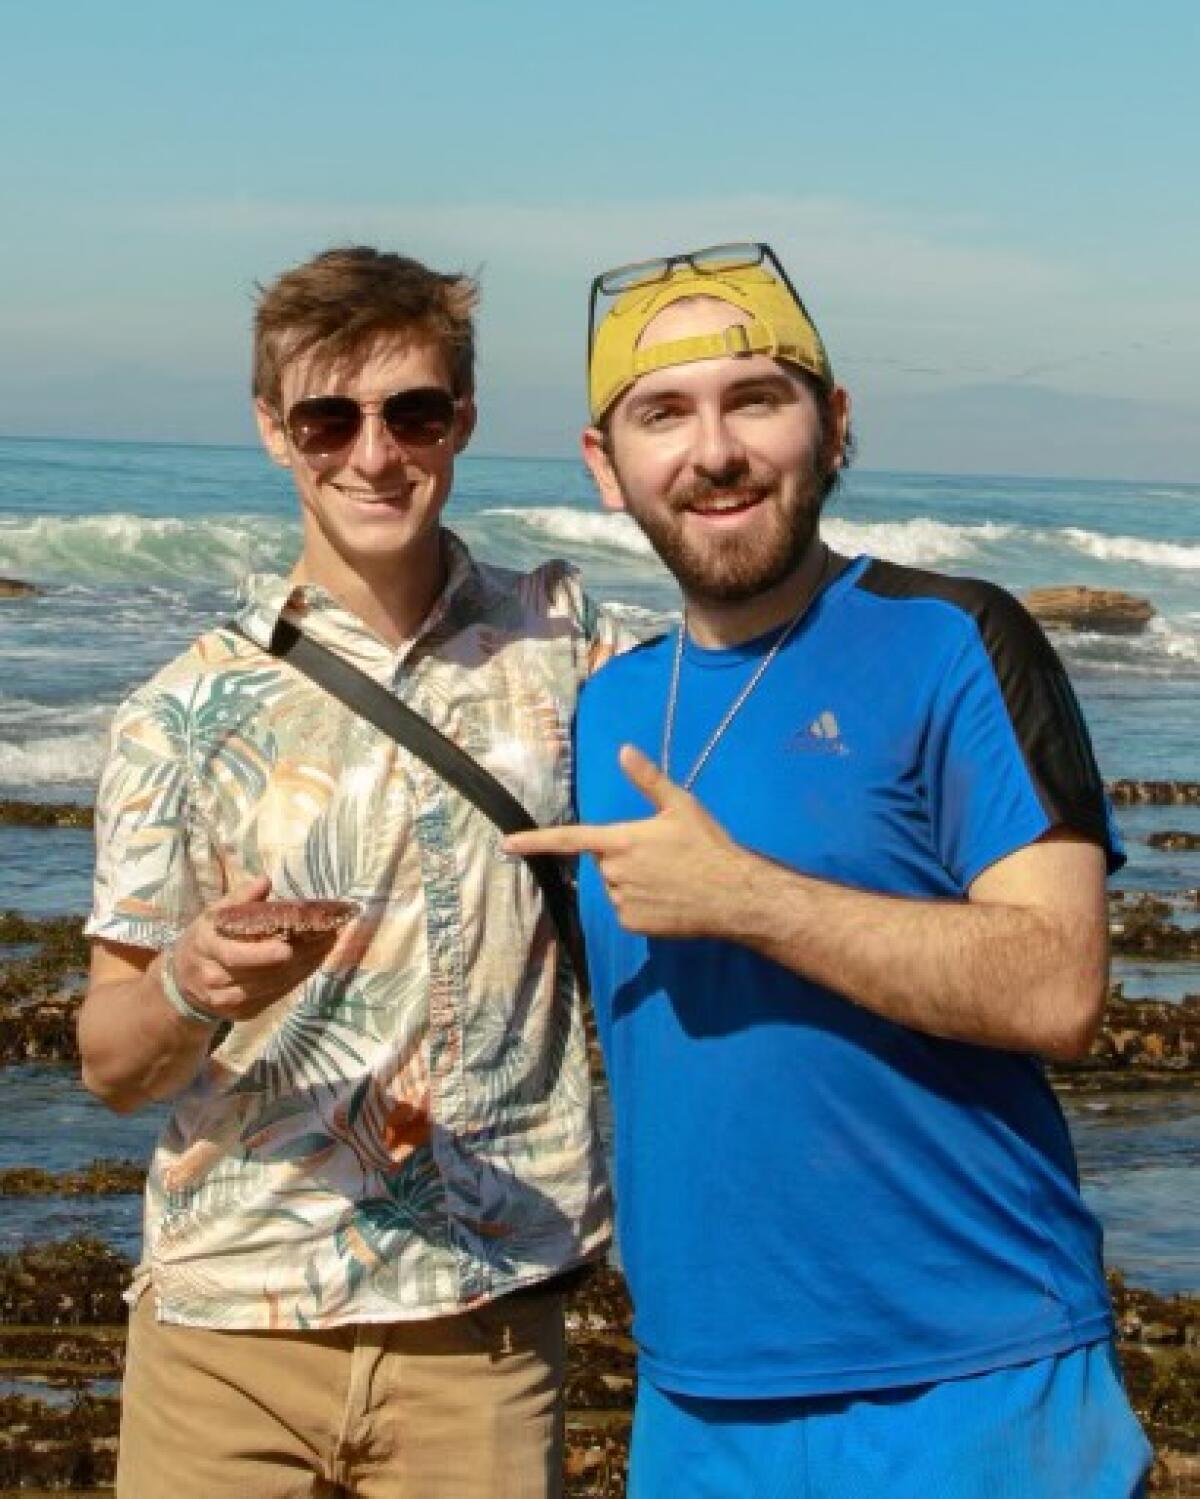 Two young men pose for a photo with the ocean behind them.